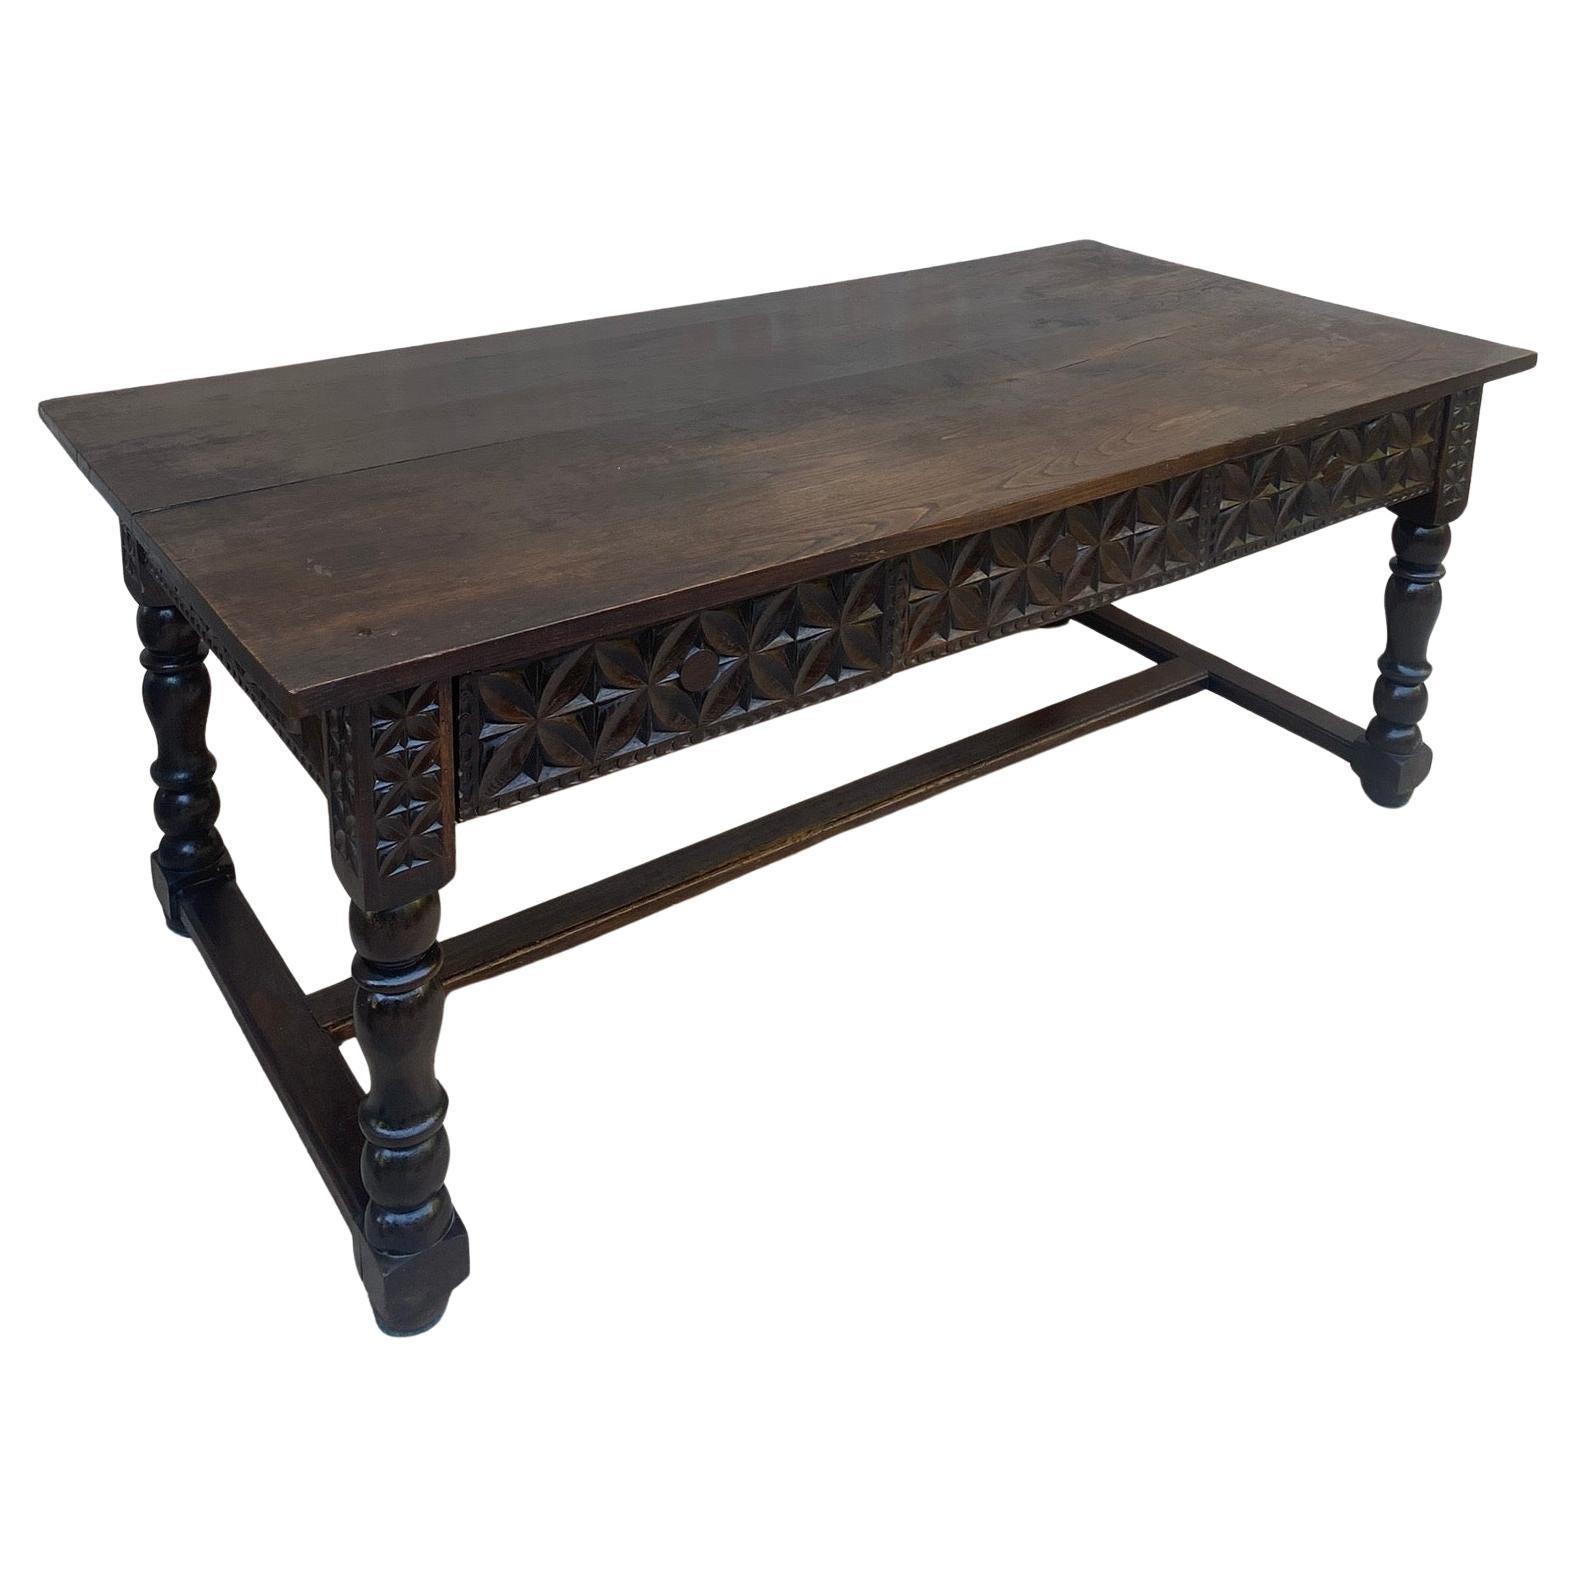 Found in the South of France, this 19th century hand carved French walnut table or desk can be placed in the middle of a room as it is beautifully carved on all sides. It features a beautiful solid wood top in a walnut colour, over two large front